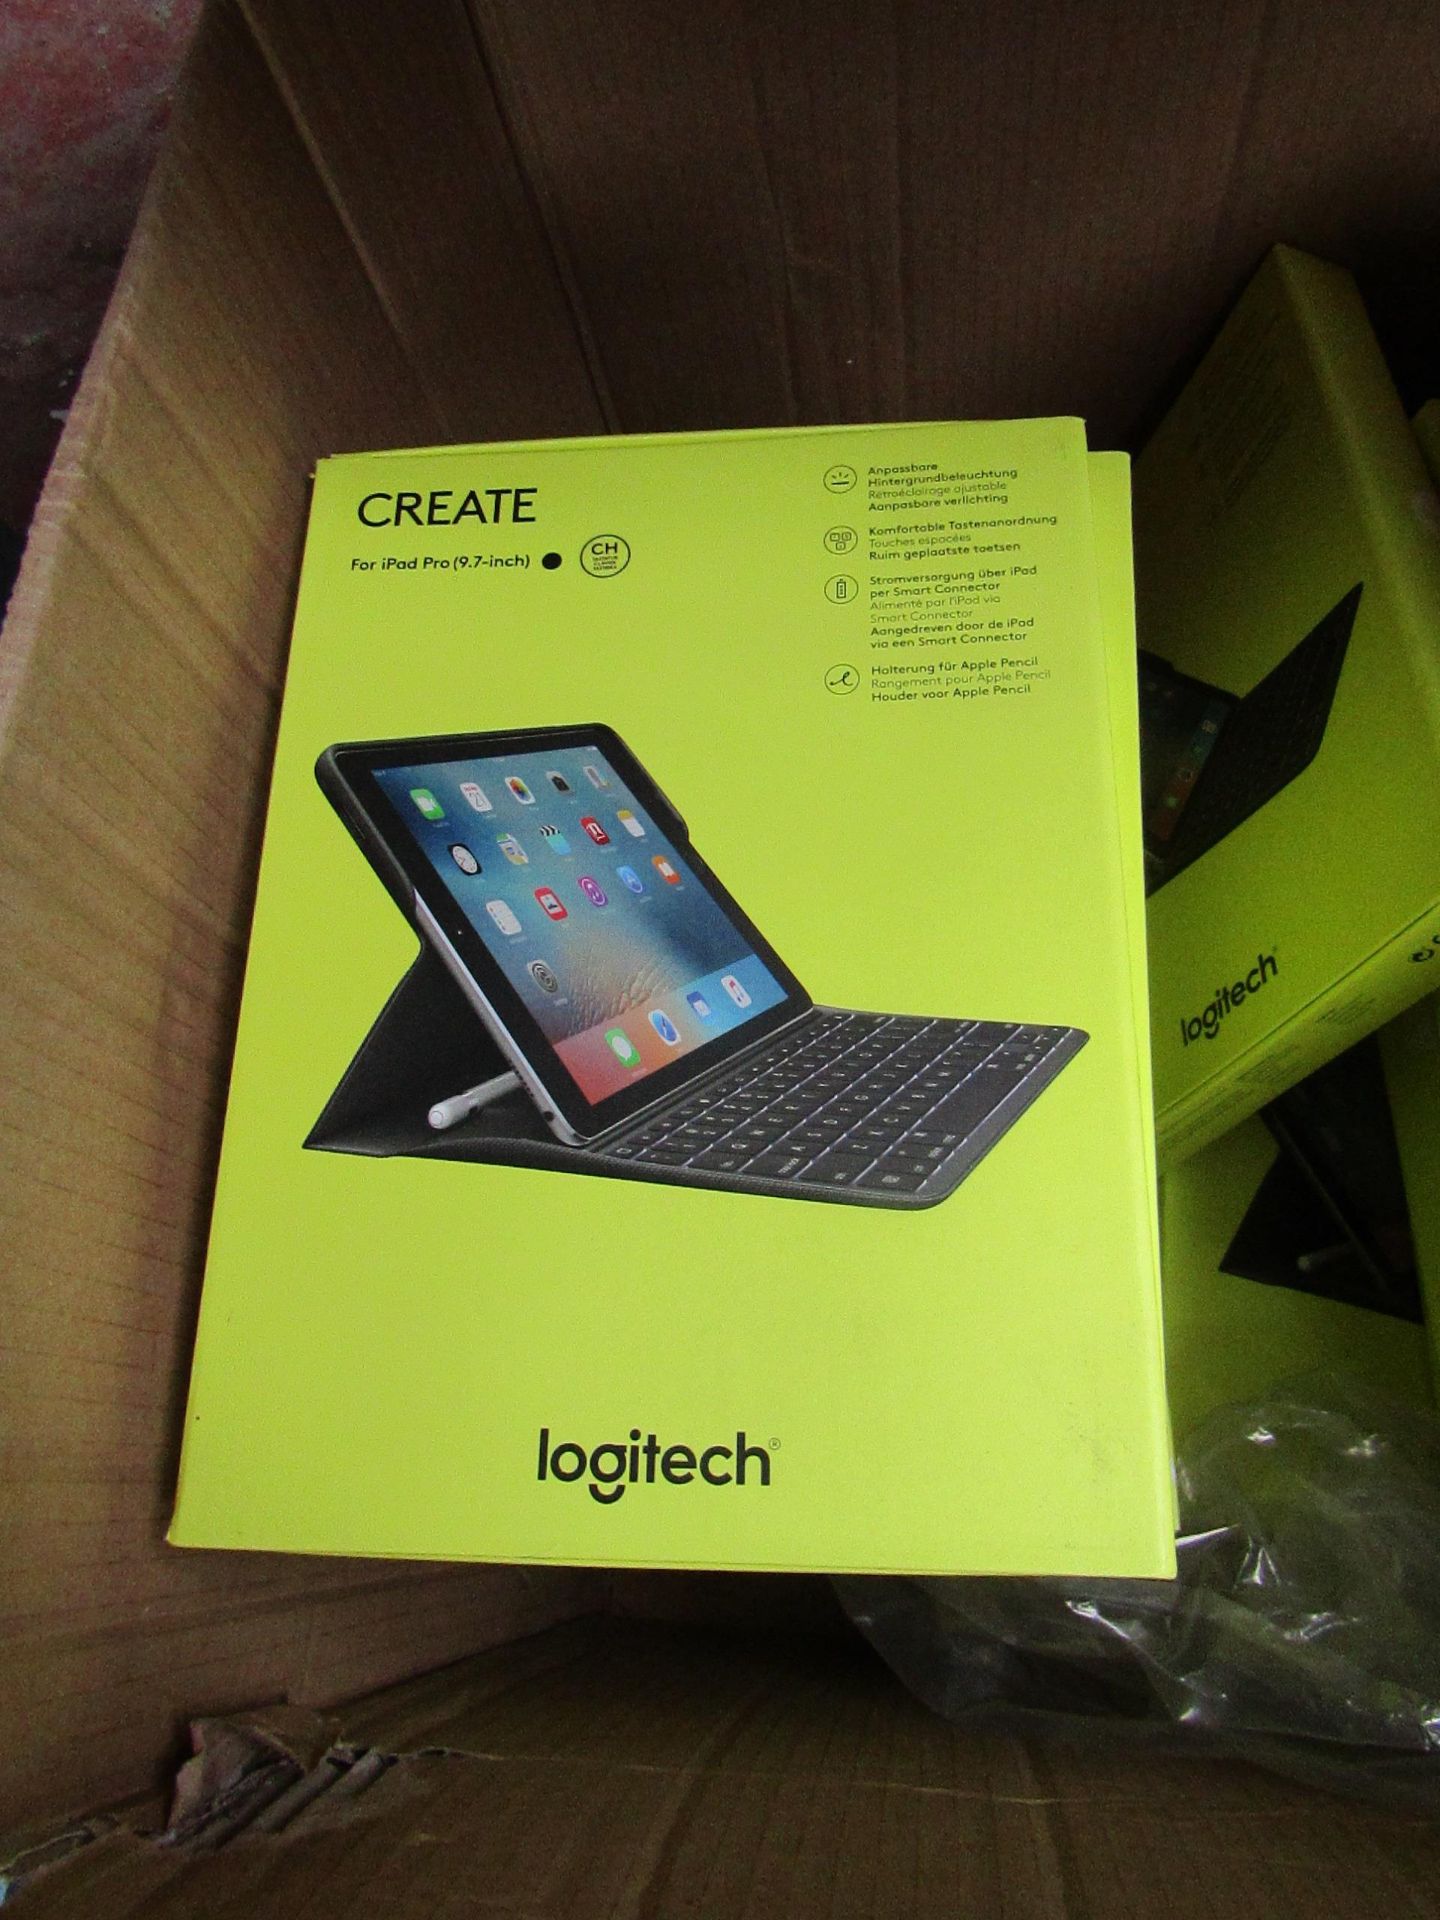 Logitech Create keyboard for iPad Pro 9.7", unchecked and boxed. Unsure on keyboard layout